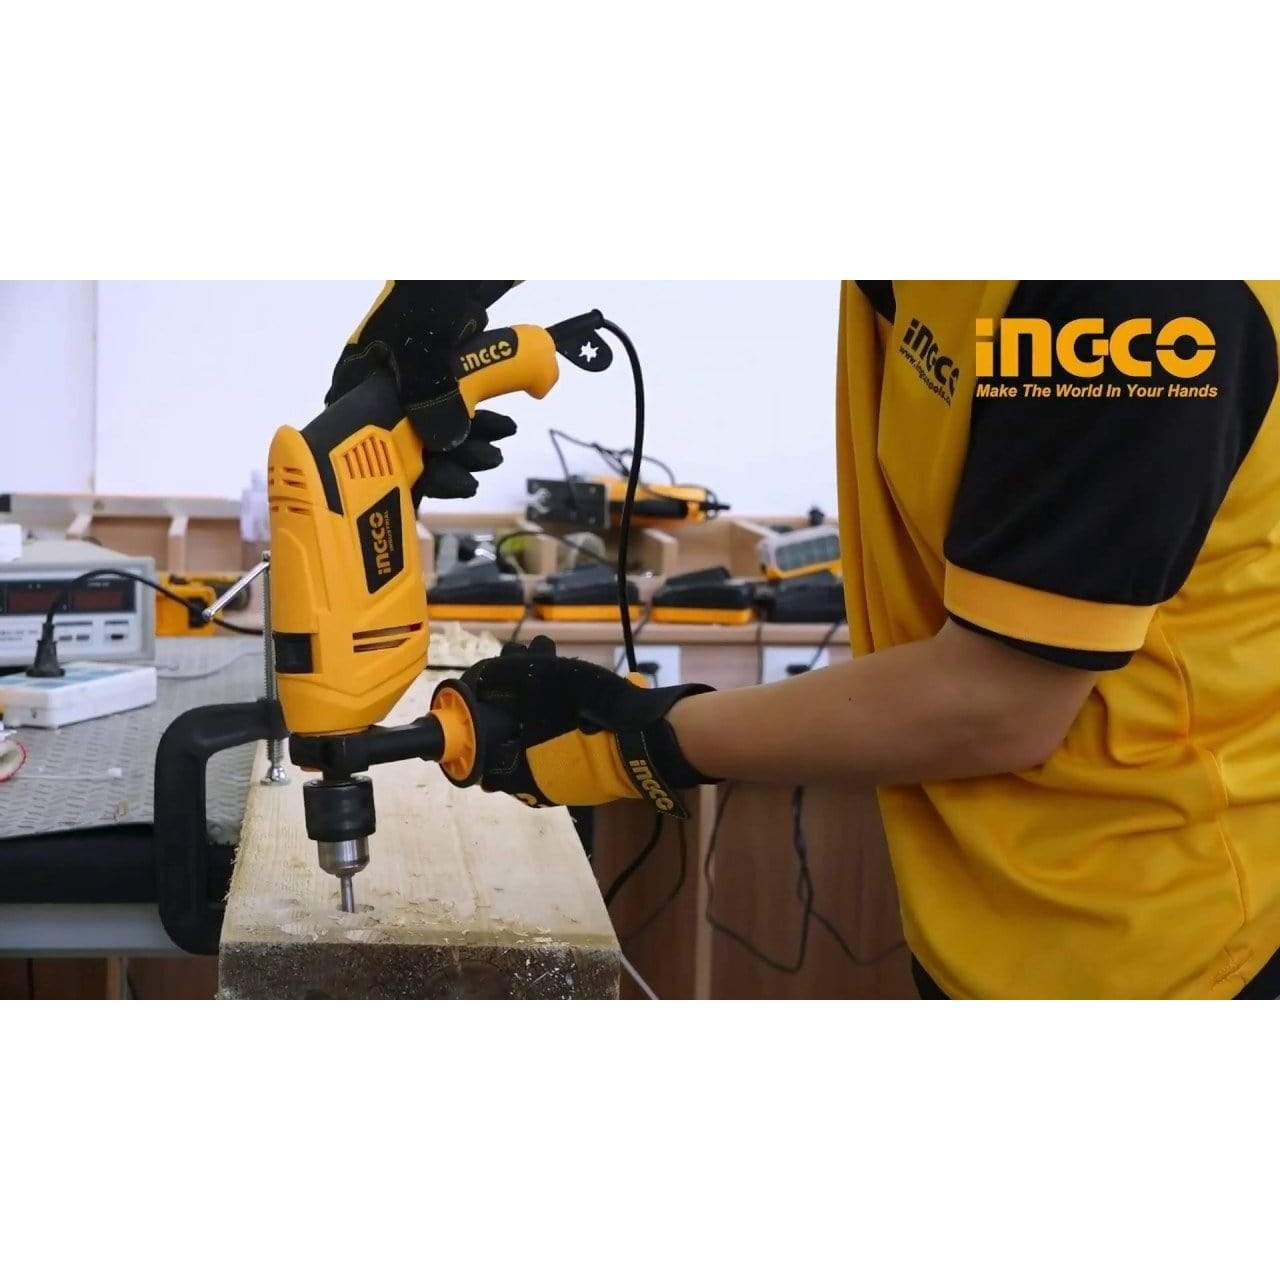 Ingco Hammer Impact Drill 13mm 710W - ID7108 | Supply Master | Accra, Ghana Tools Buy Tools hardware Building materials